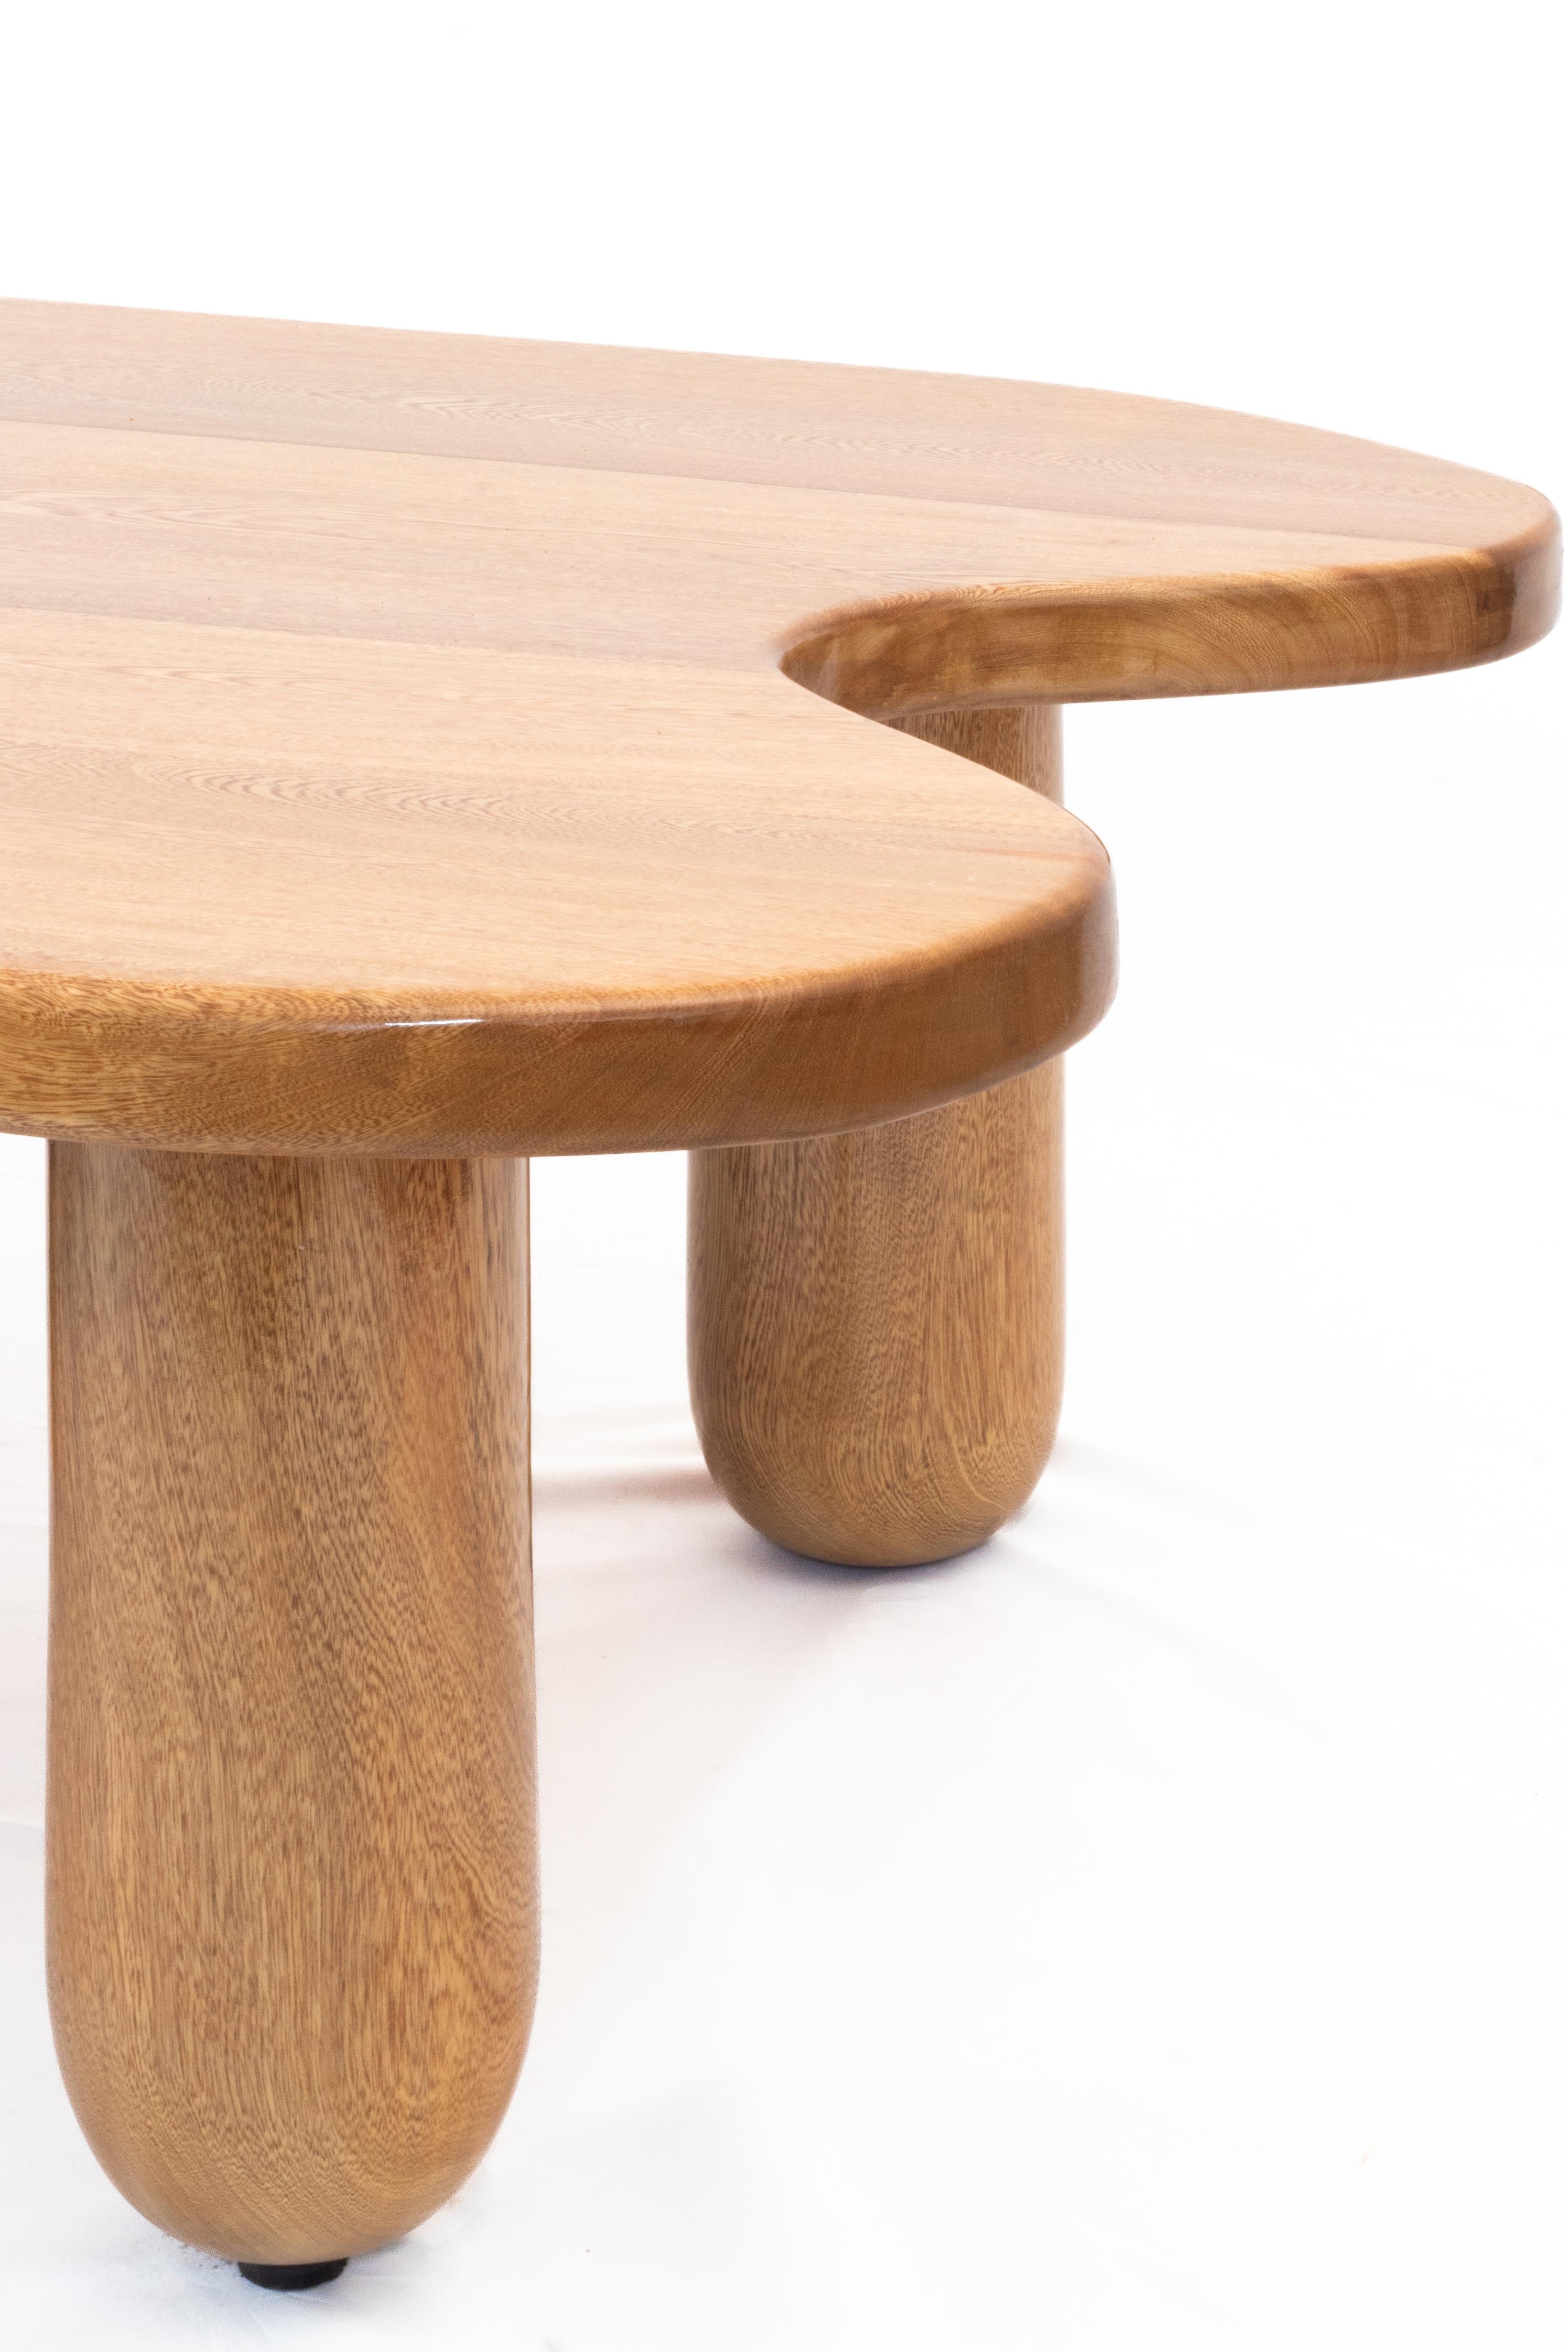 Organic Modern Lago Table in solid Mexican Oak; organic shapes; a contemporary coffee table. For Sale